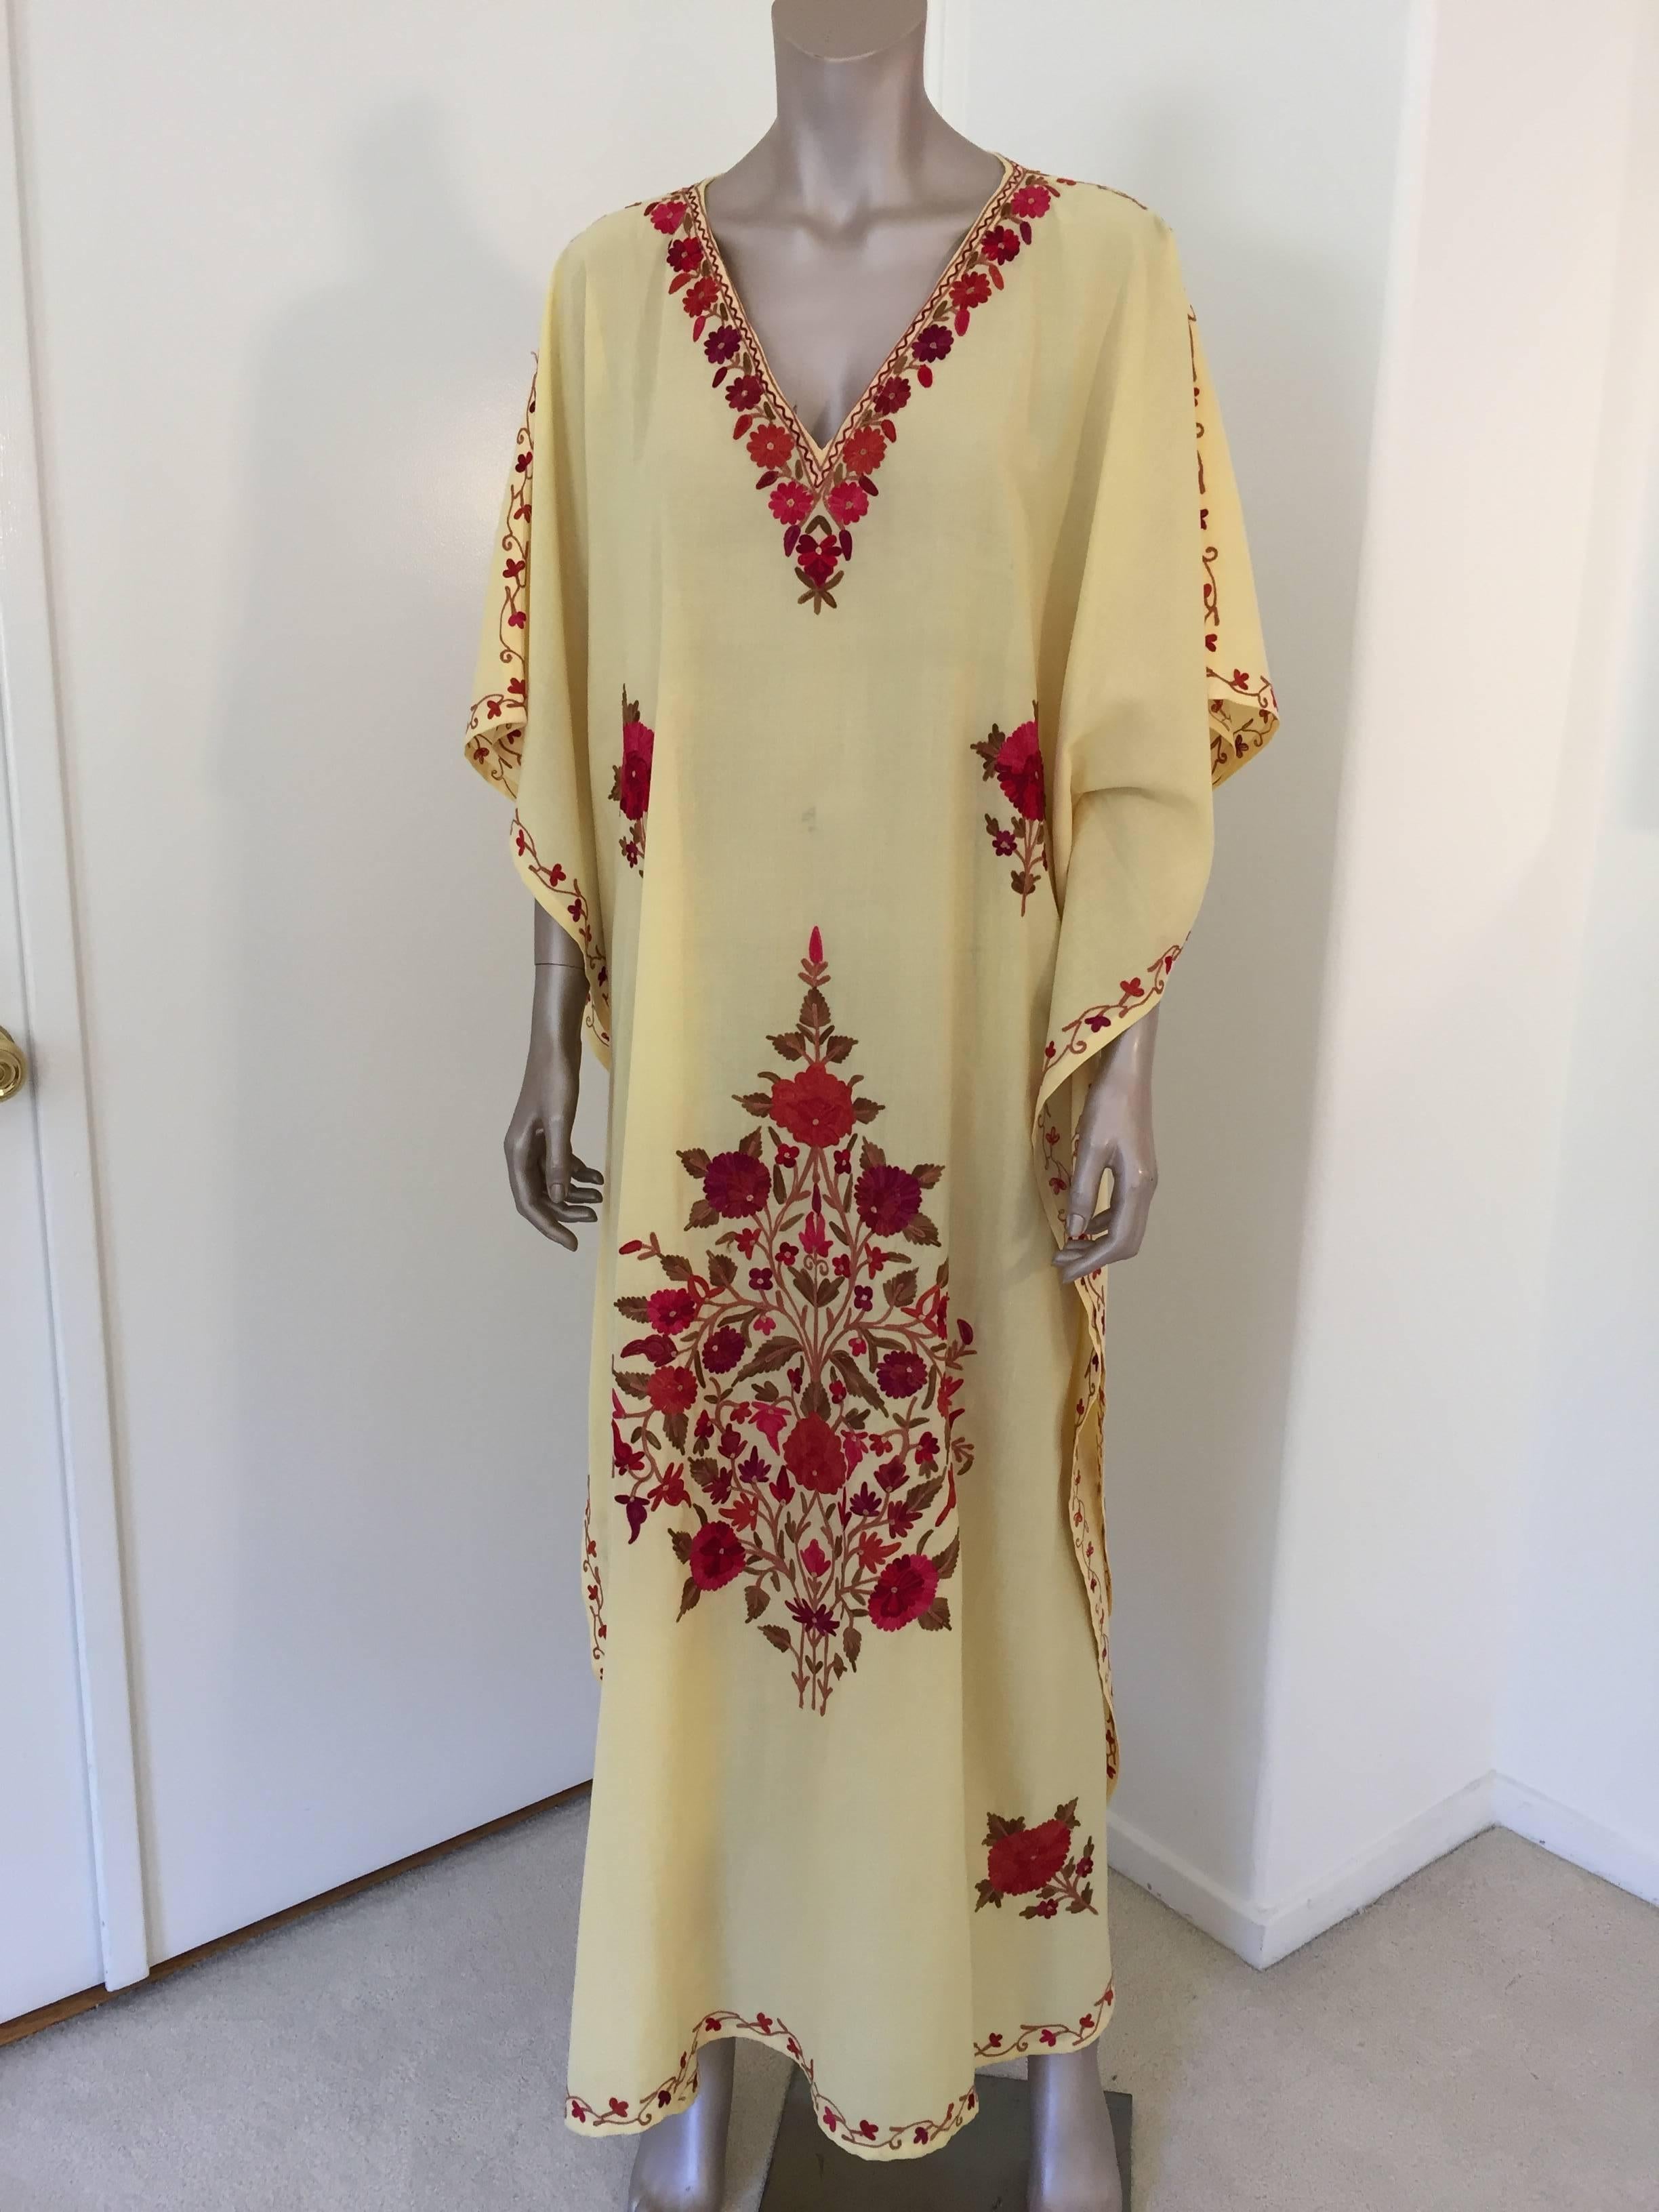 Bohemian Moroccan caftan embroidered with red embroideries, butterfly style shape.
Circa 1970s.
This long maxi dress kaftan is embroidered and embellished with red floral designs.
In Morocco, fashion preserves its traditional style inherited from